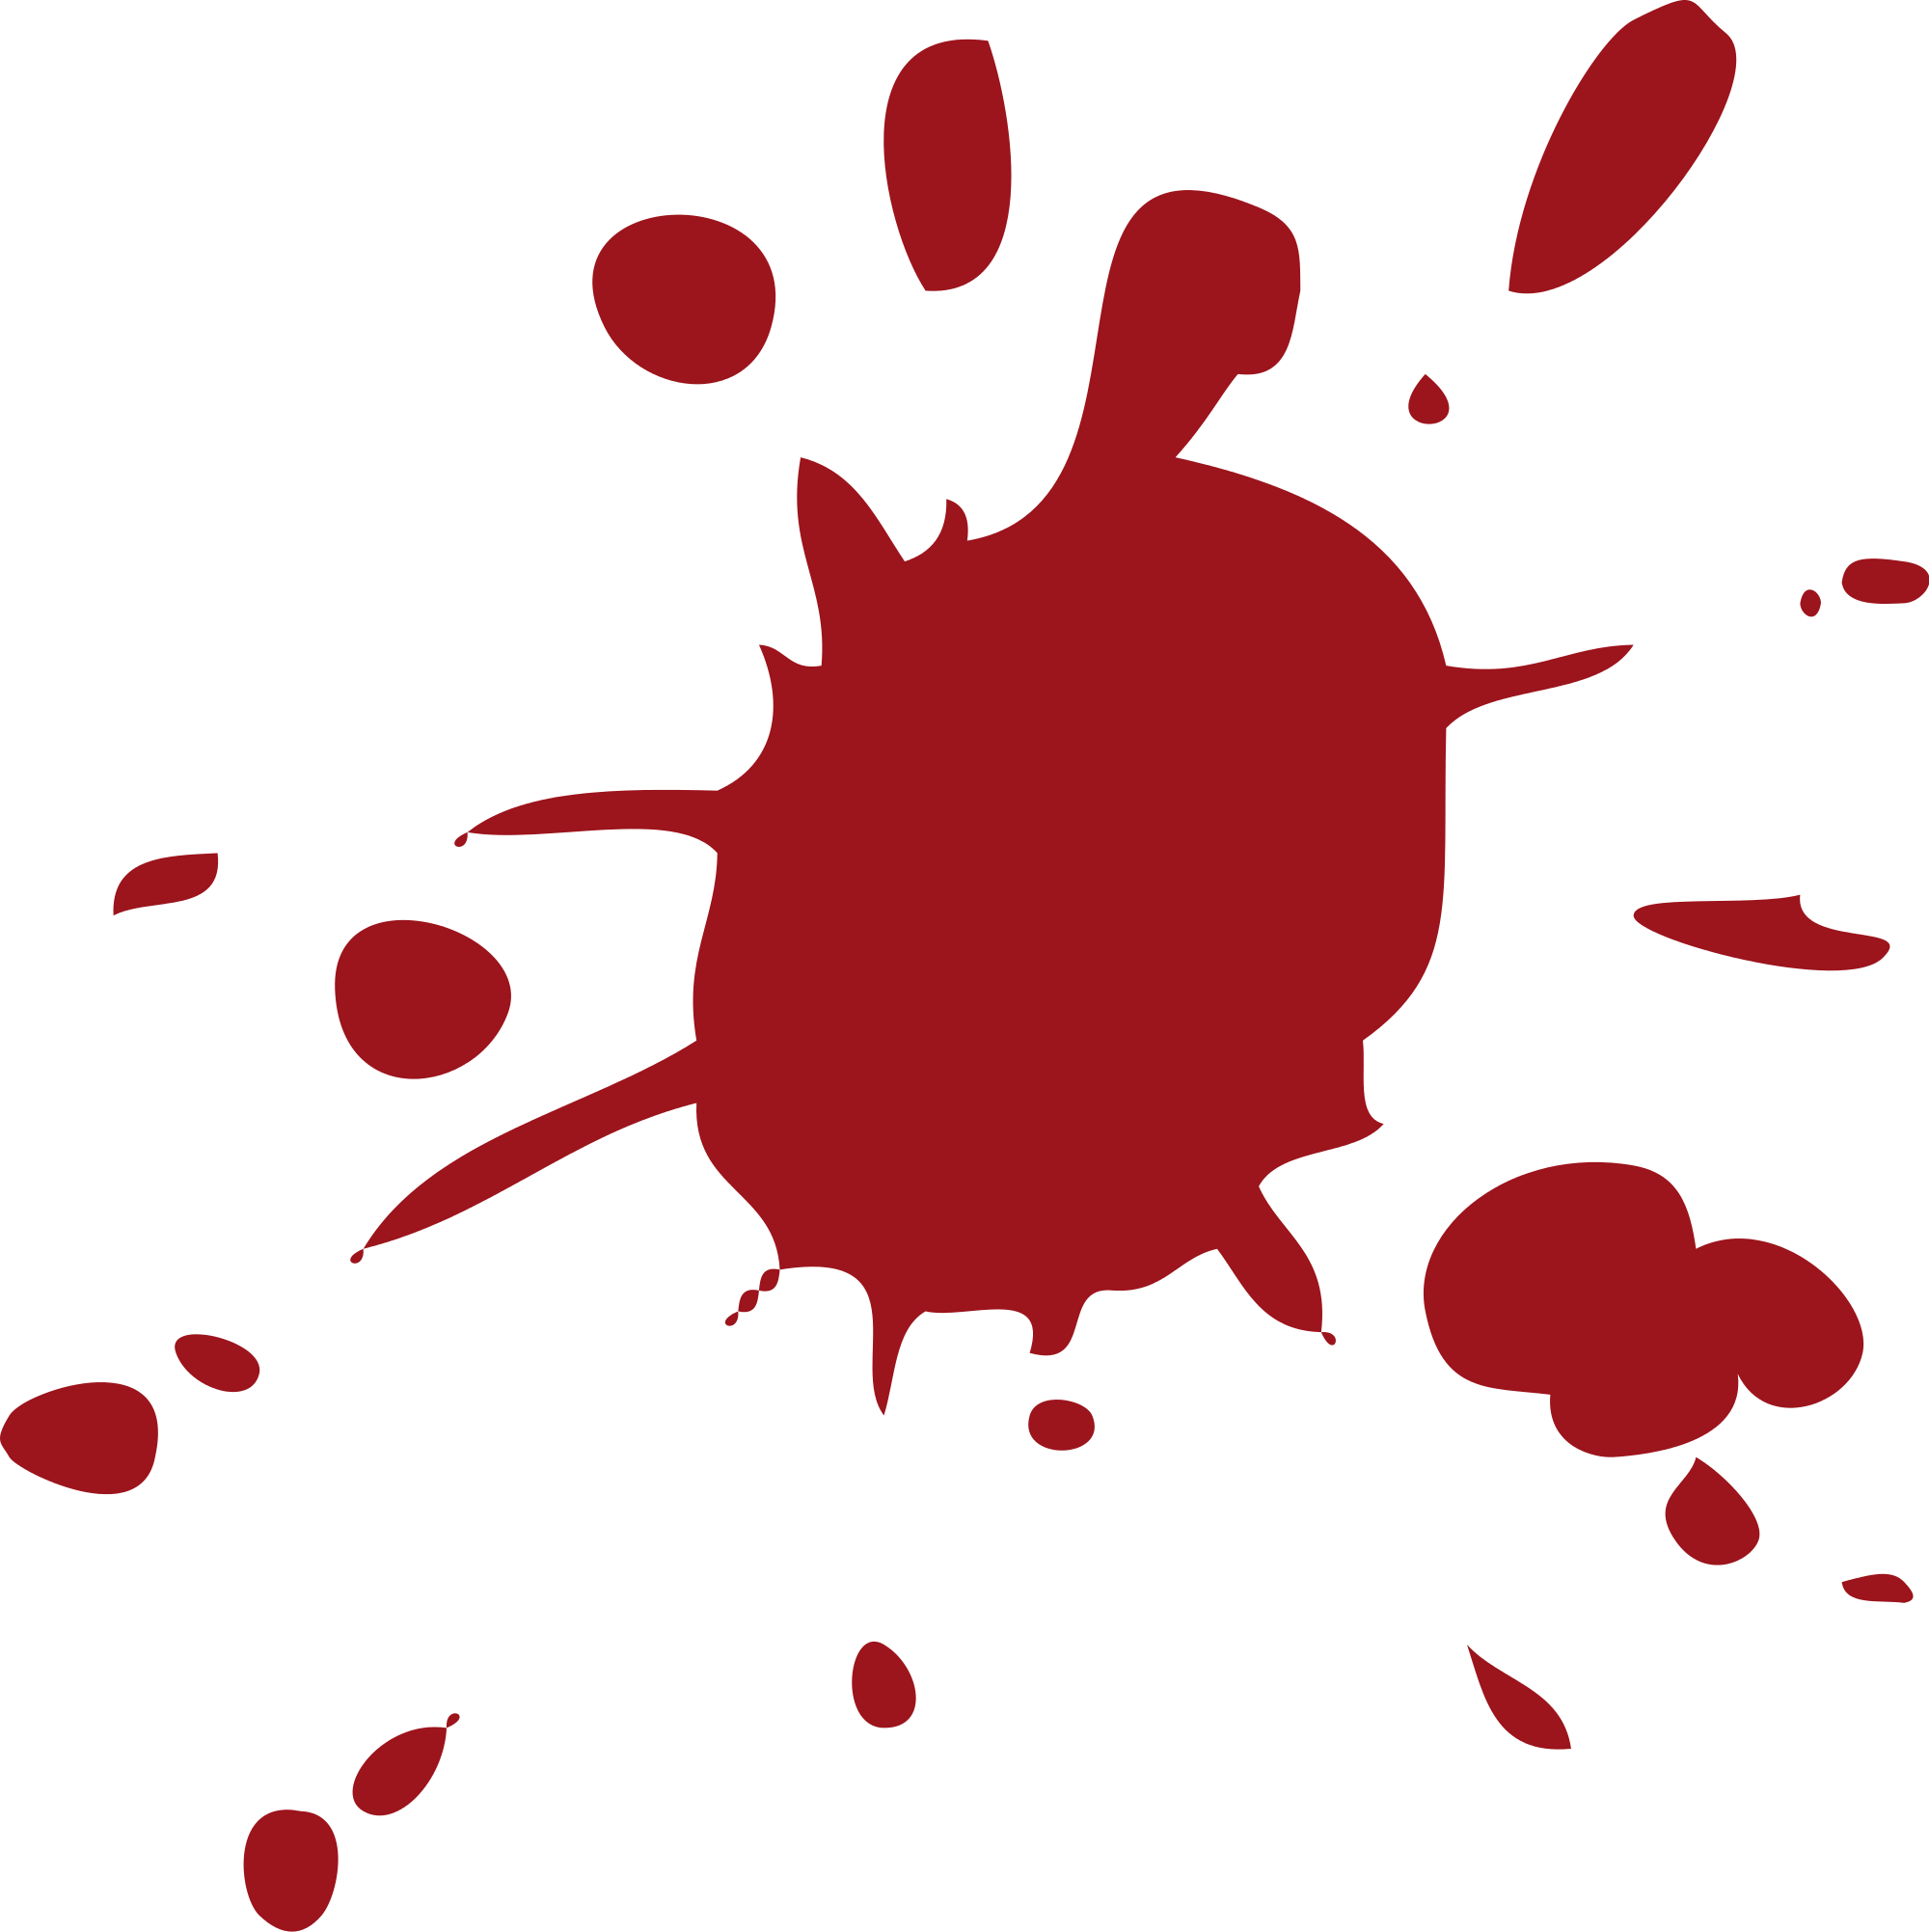 Pool of blood png. Images free download splashes